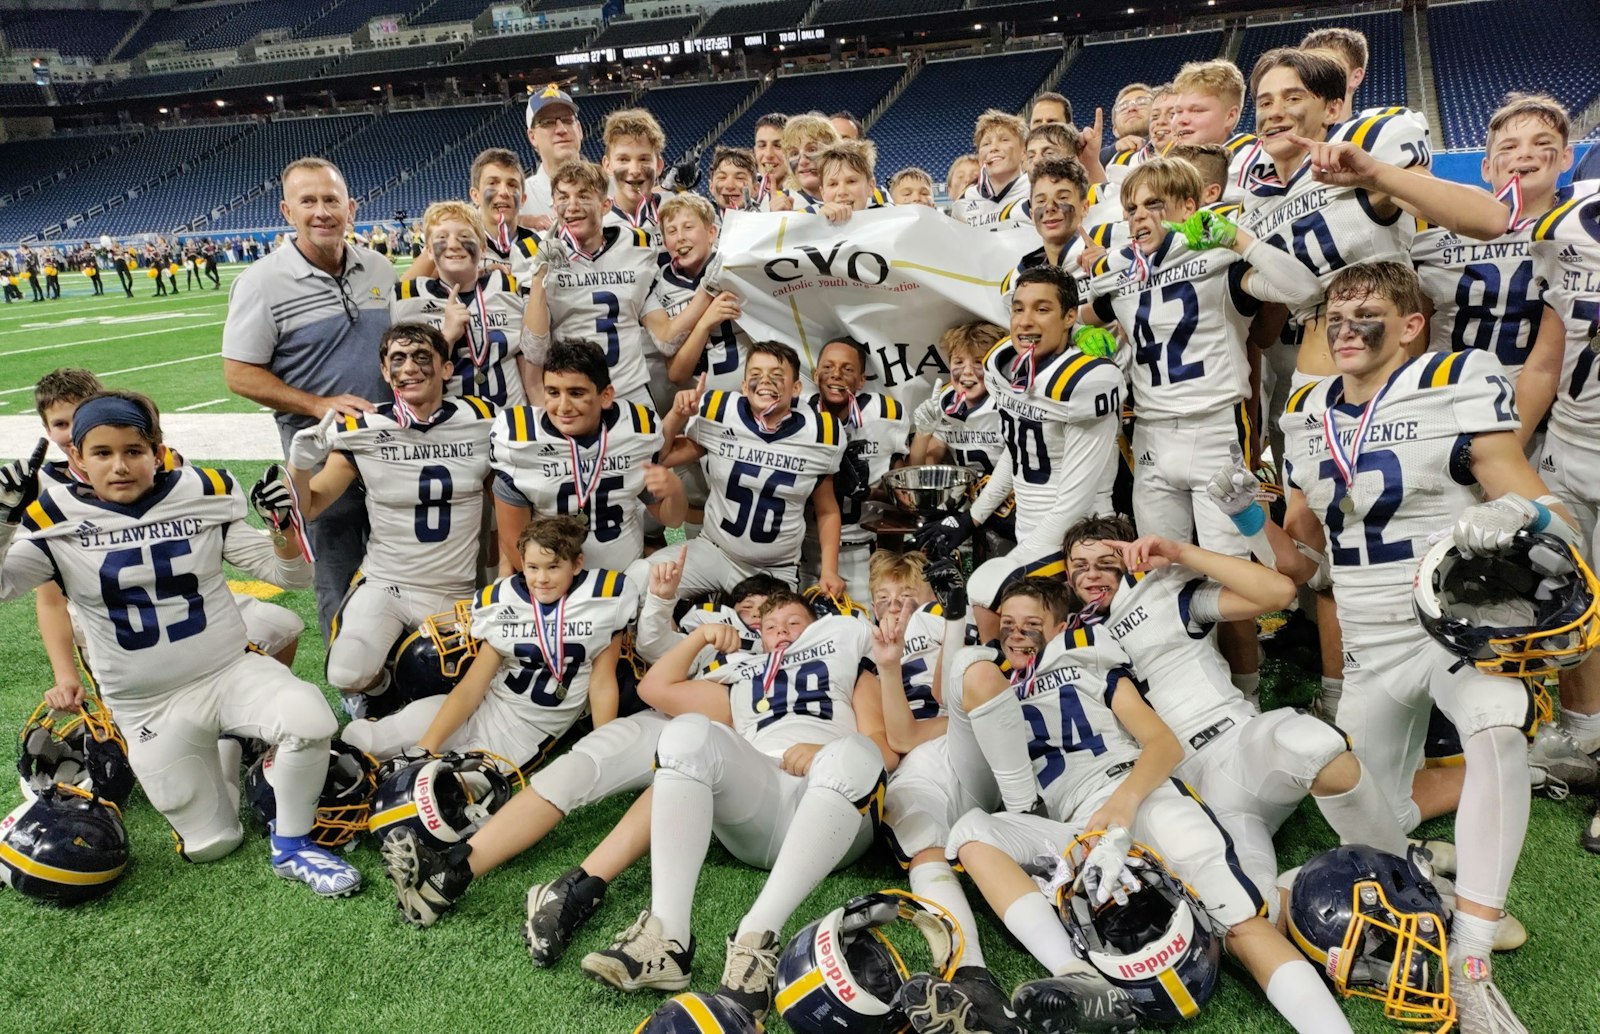 CYO A-B DIVISION CHAMPS: Utica St. Lawrence won its first CYO football championship by beating Dearborn Divine Child, 27-16, in the Prep Bowl at Ford Field. This fall, more than 1,350 students participated in CYO football on 54 teams at fourth, fifth-and-sixth, and seventh-and-eighth-grade levels. In total, the archdiocesan-wide CYO athletics program offers students in grades 4 thru 8 opportunities to participate fall, winter and spring in 11 sports.